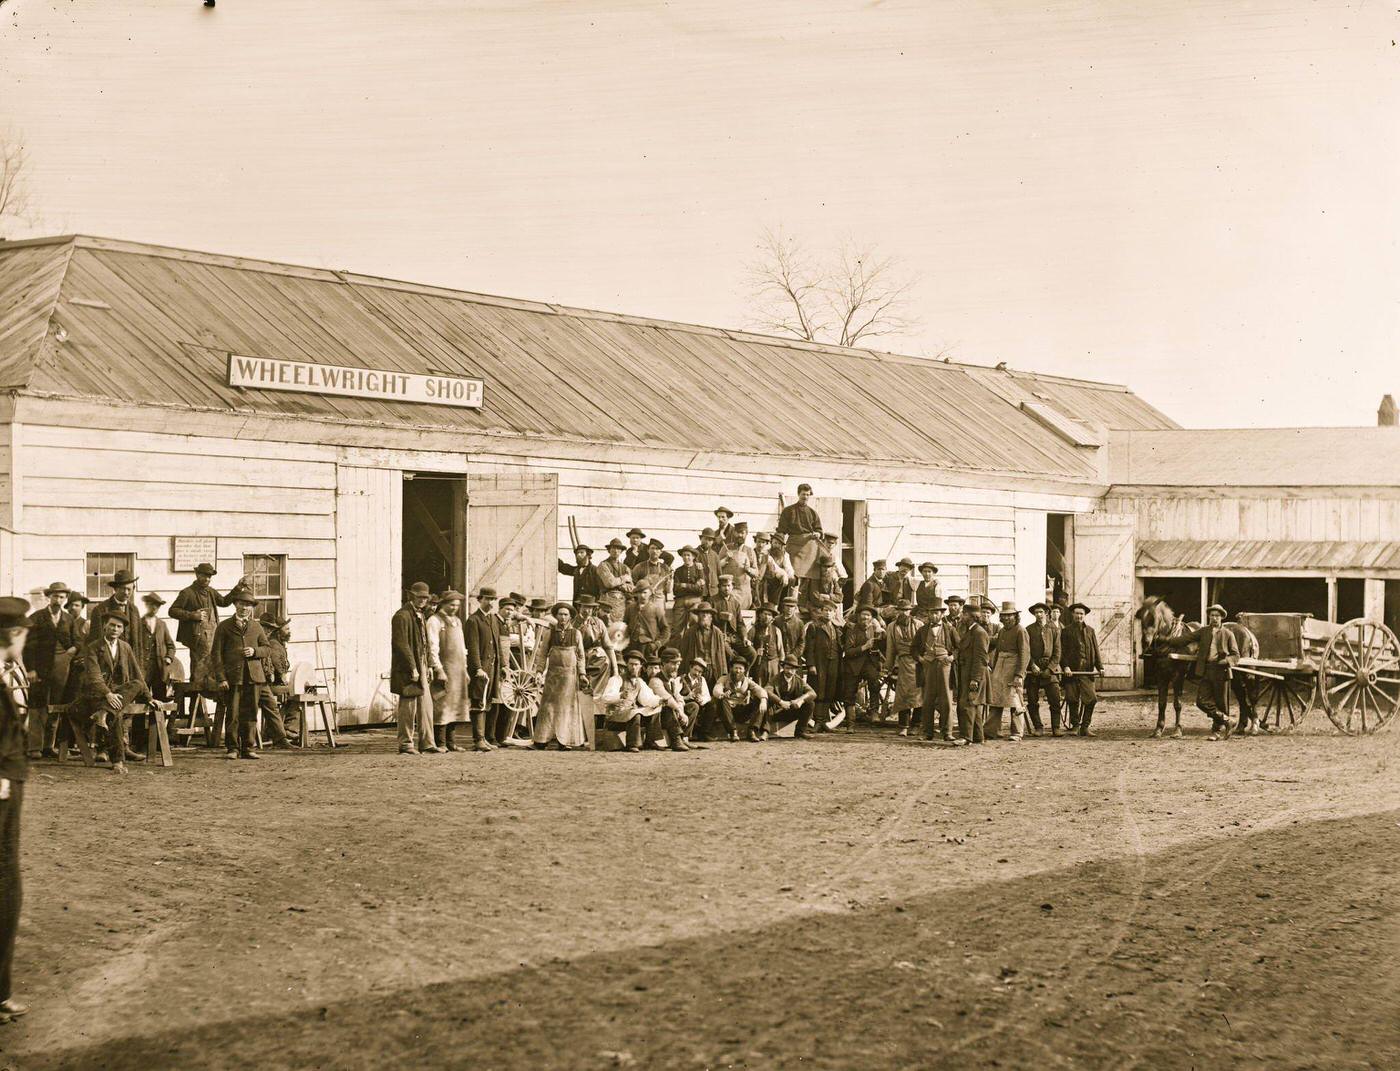 Government repair shops; Wheelwright shop, 1860s